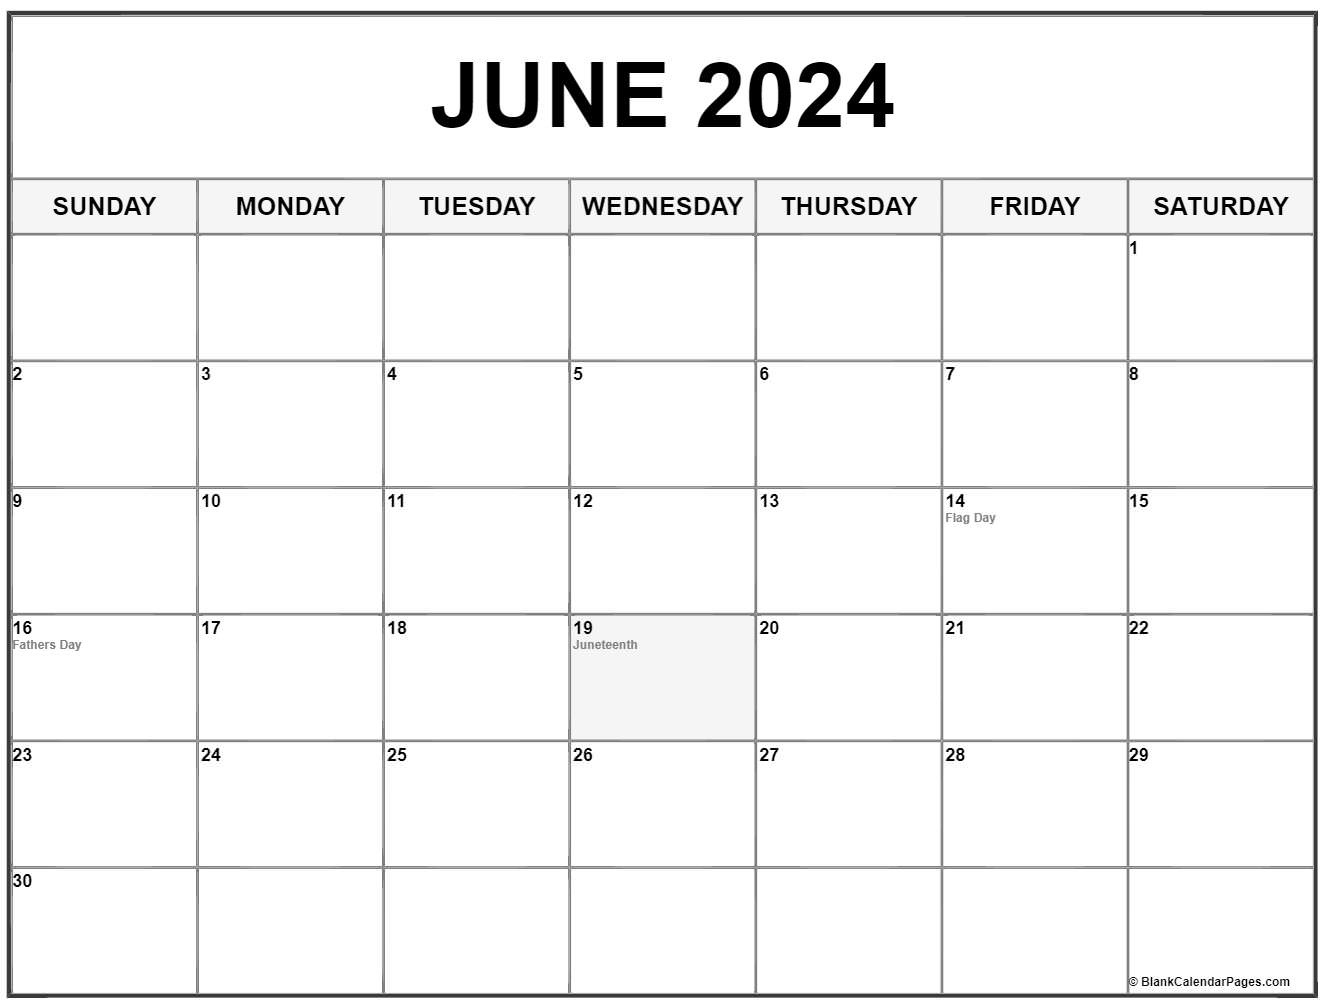 June 2024 With Holidays Calendar intended for June Calendar With Holidays 2024